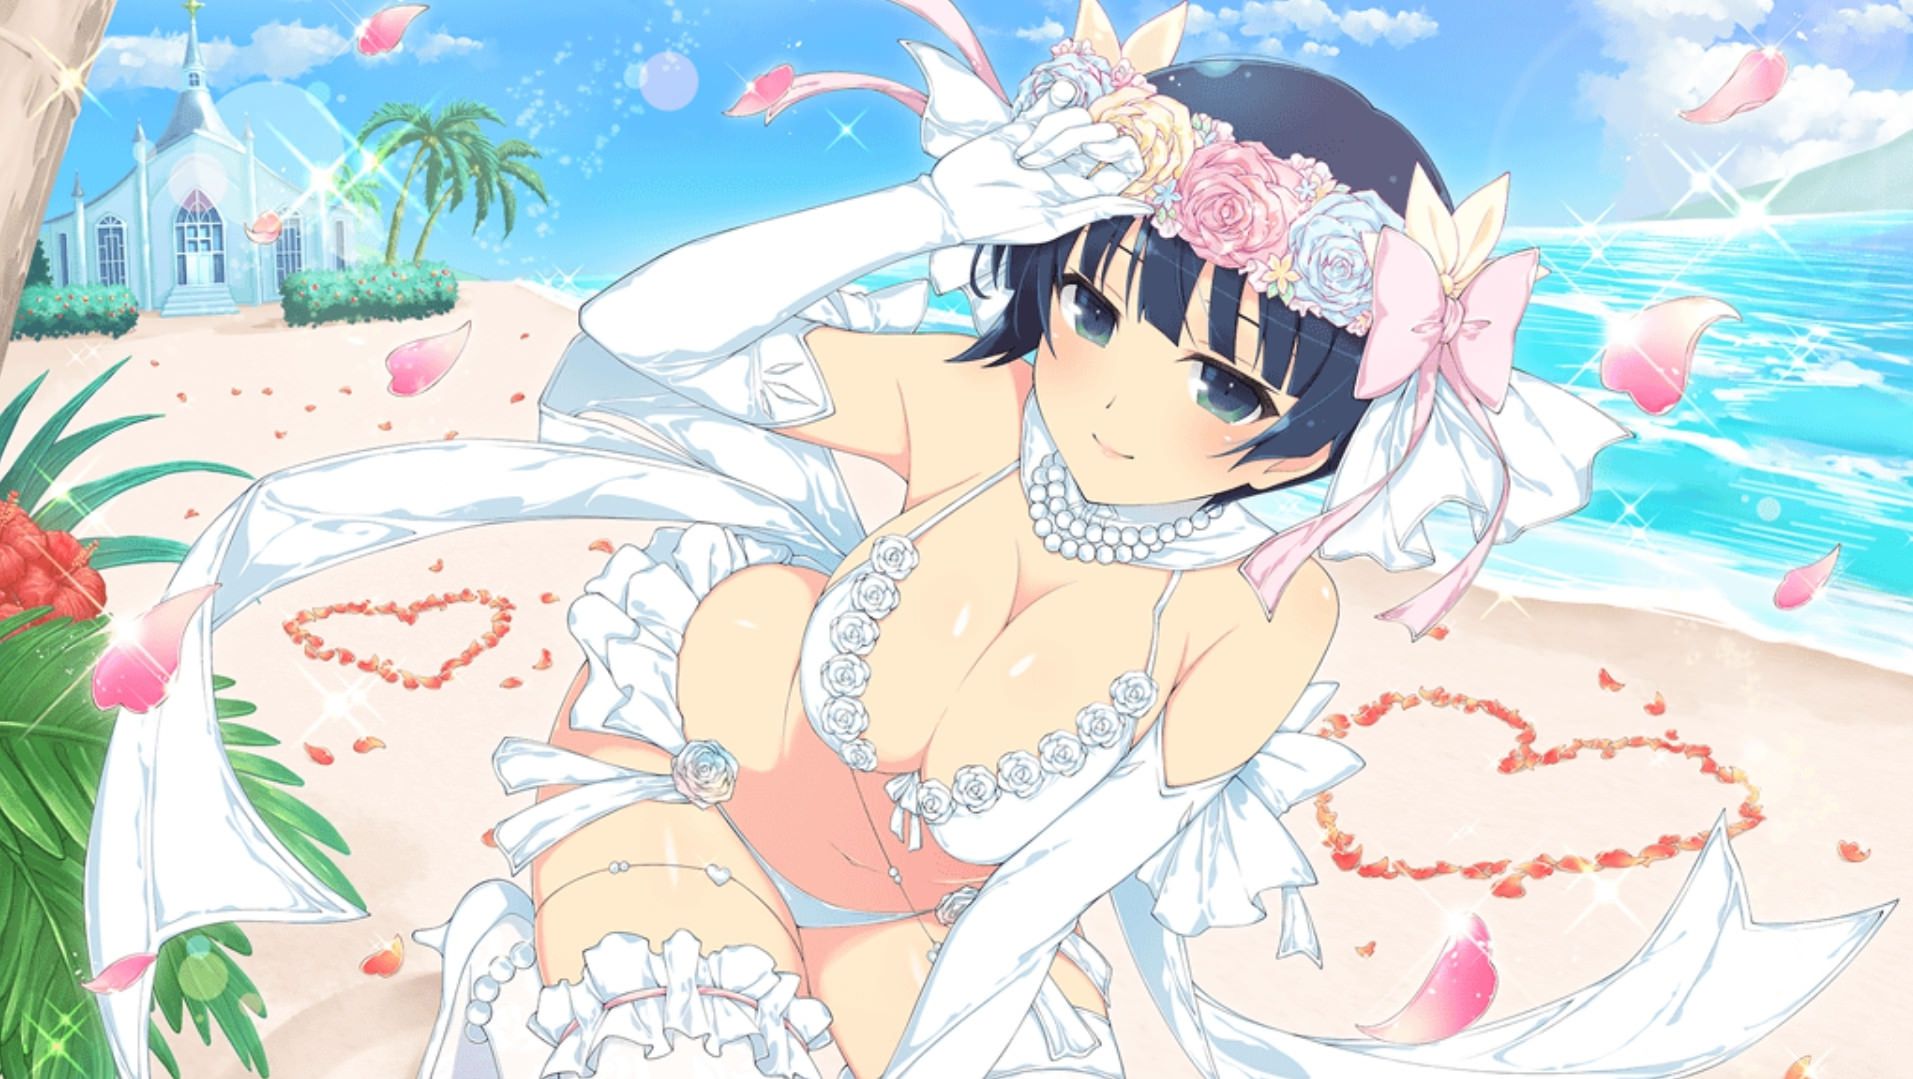 [Large amount of images] Cicolity is the most high erotic body girl wwwwwwwwwwww in Senran Kagura 79